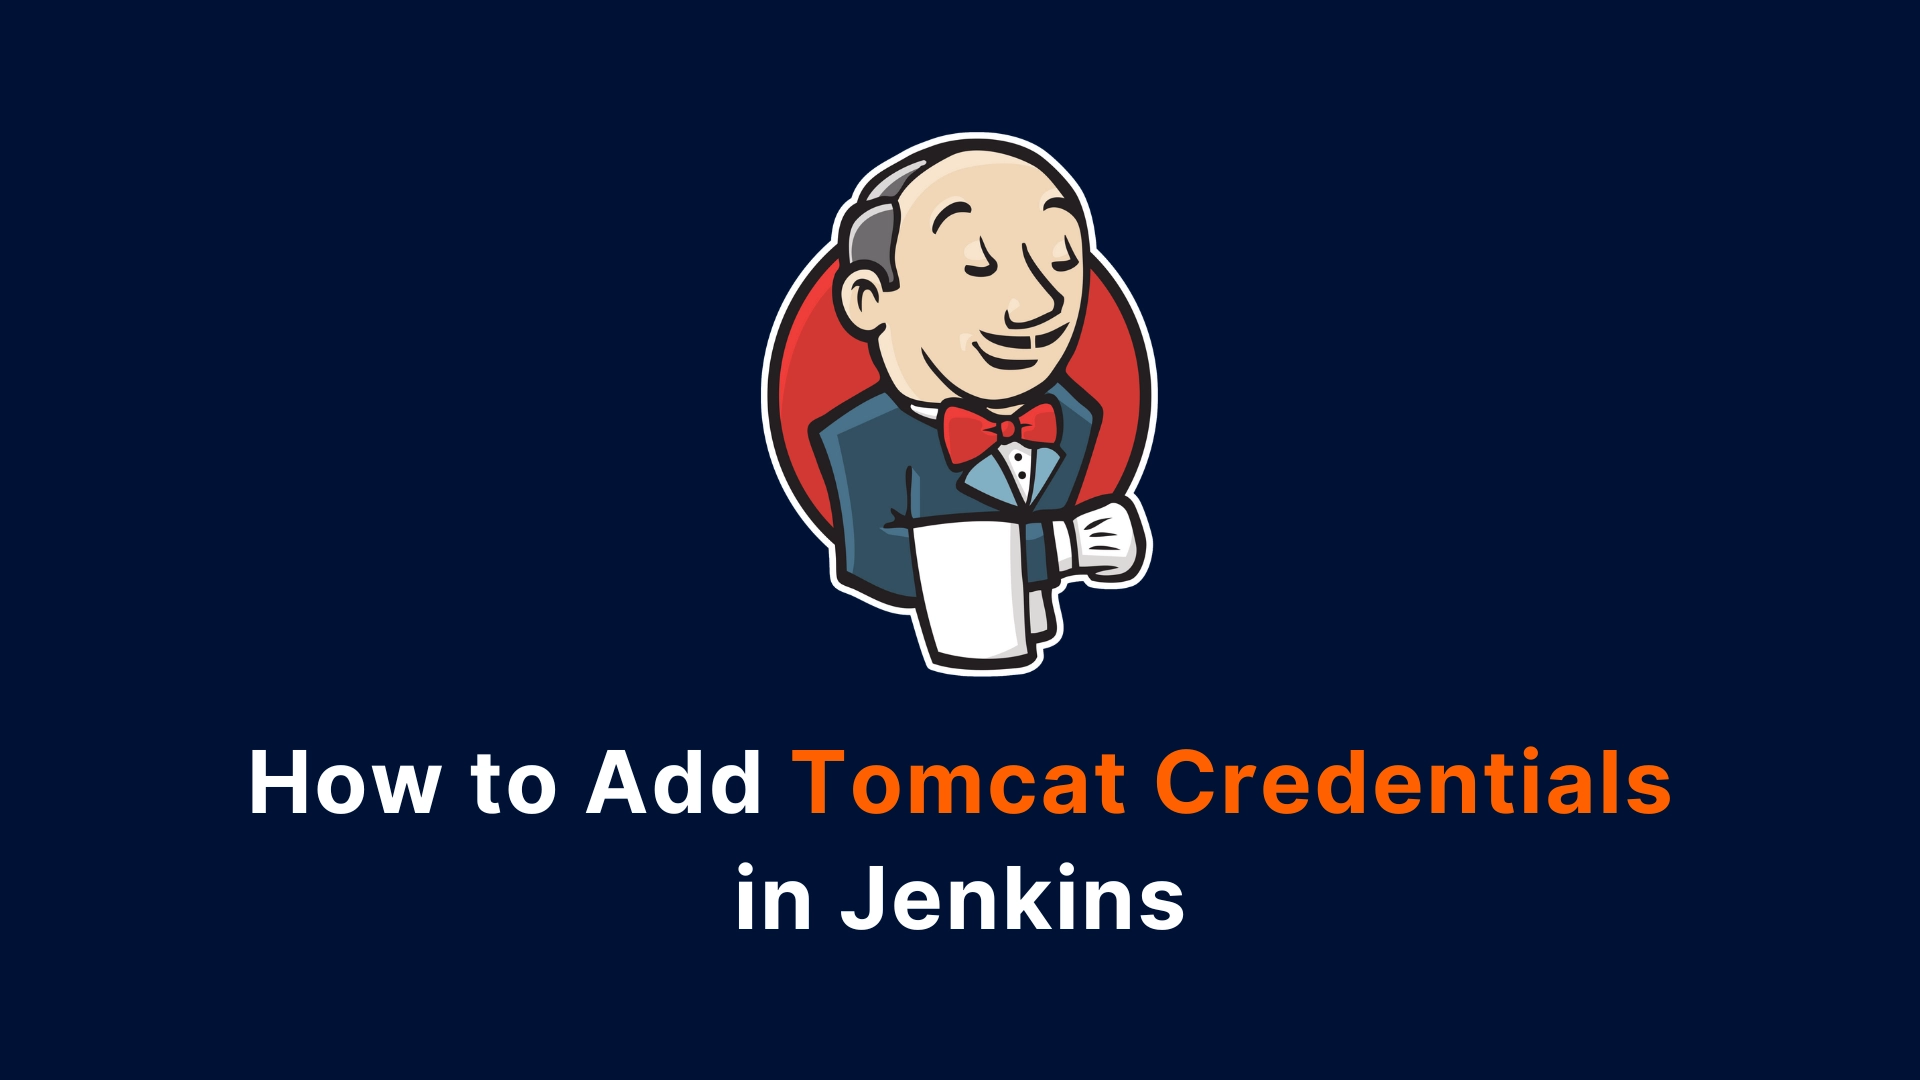 How to Add Tomcat Credentials in Jenkins